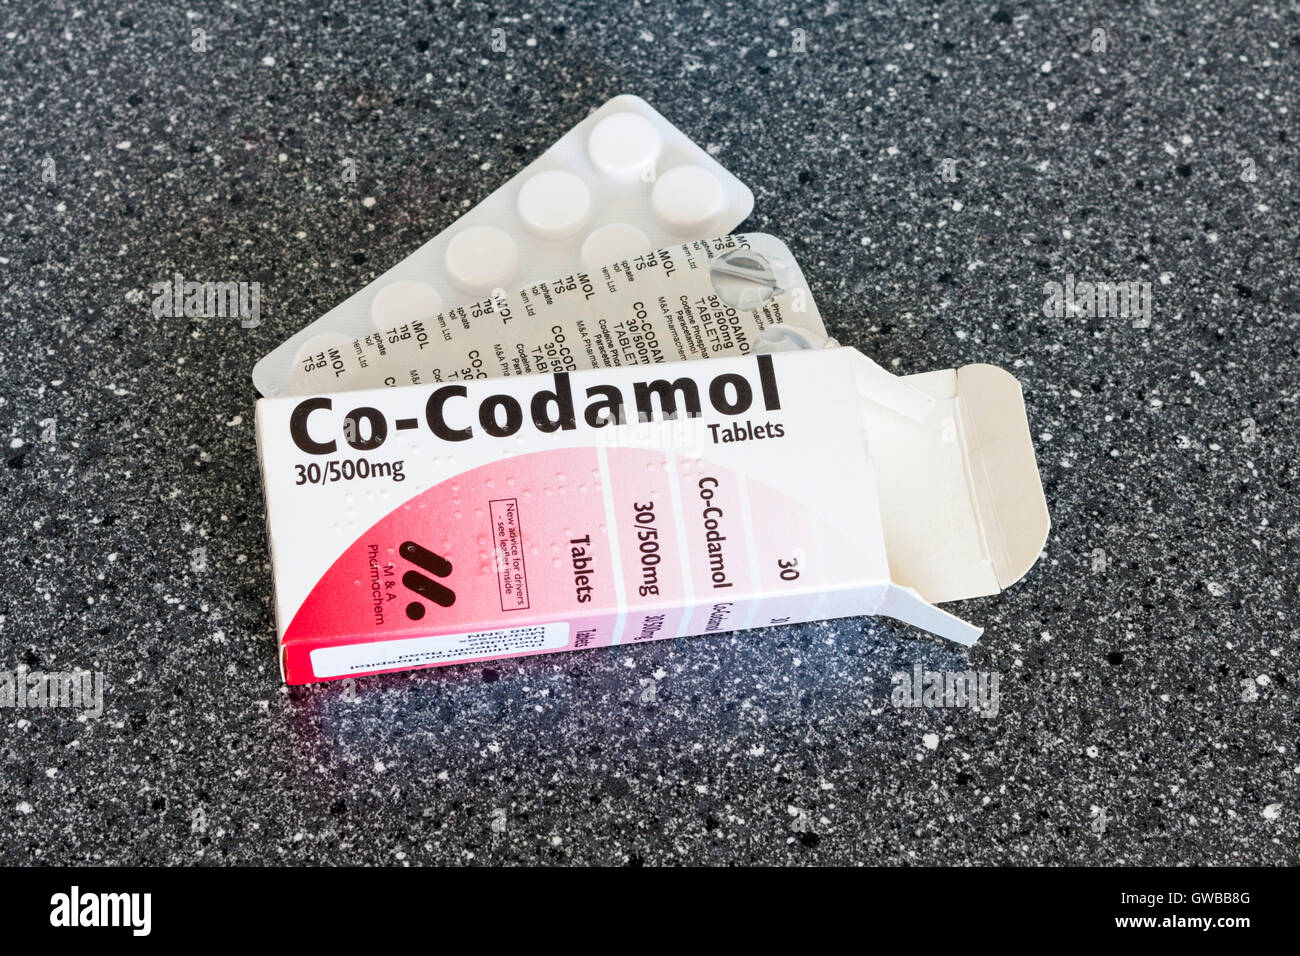 Packet and blister pack of co-codamol, a painkiller often used in hospitals Stock Photo